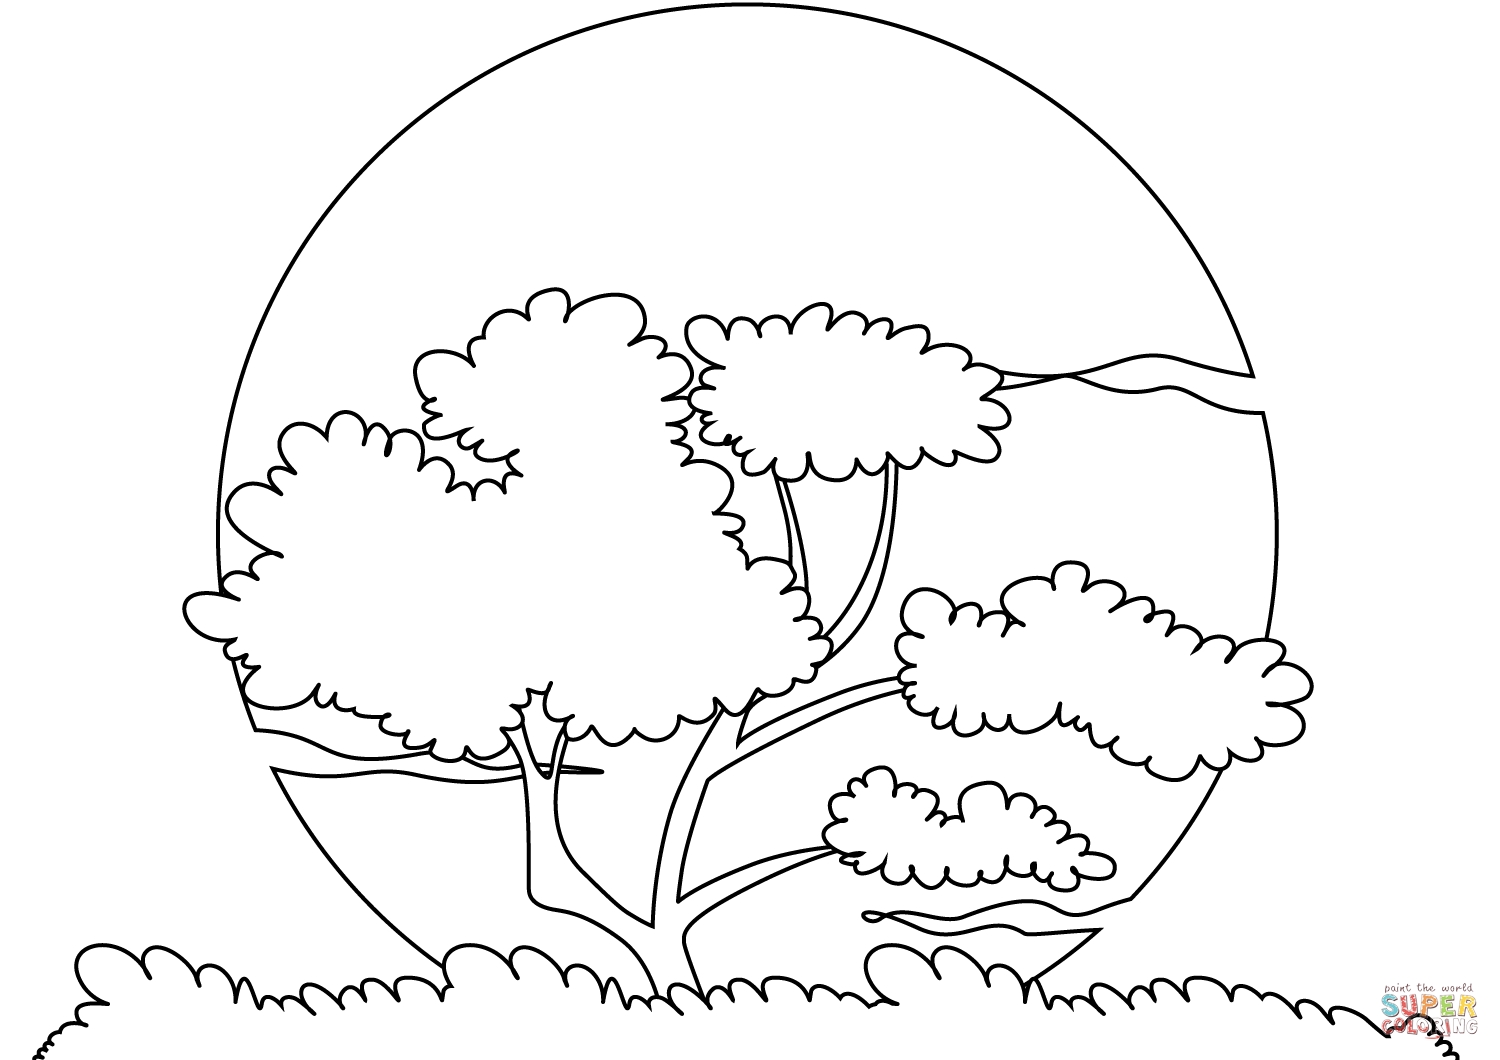 Sunset Coloring Pages for Adults Download - Coloring For ...